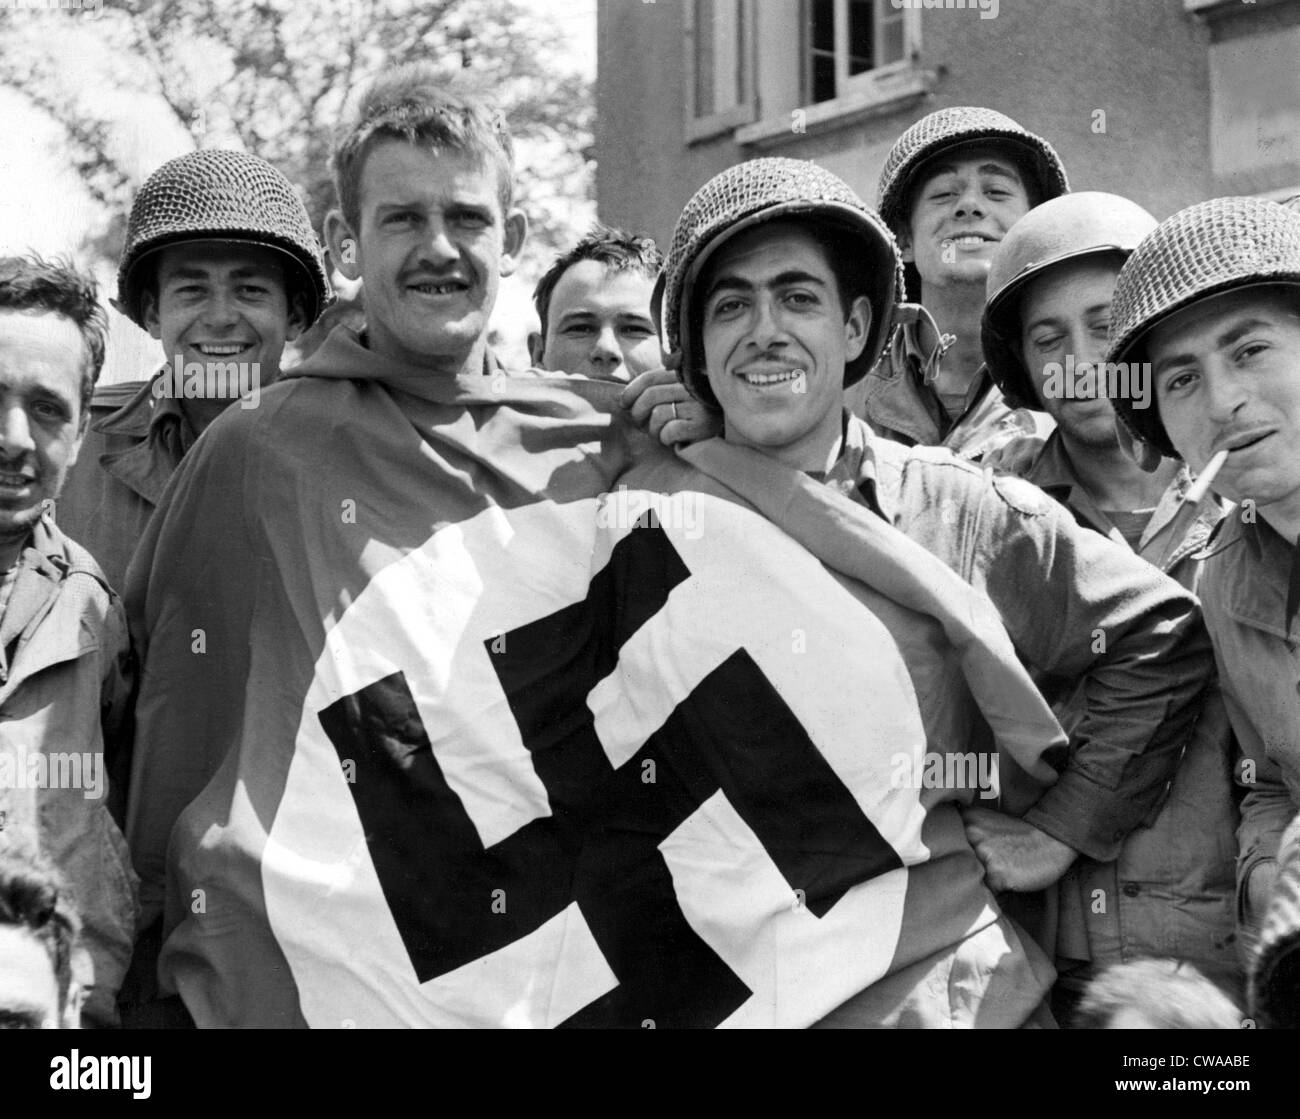 CHERBOURG, FRANCE-- A comandeered Nazi flag held by American soldiers after the liberation of Cherbourg, July 1, 1944. Stock Photo